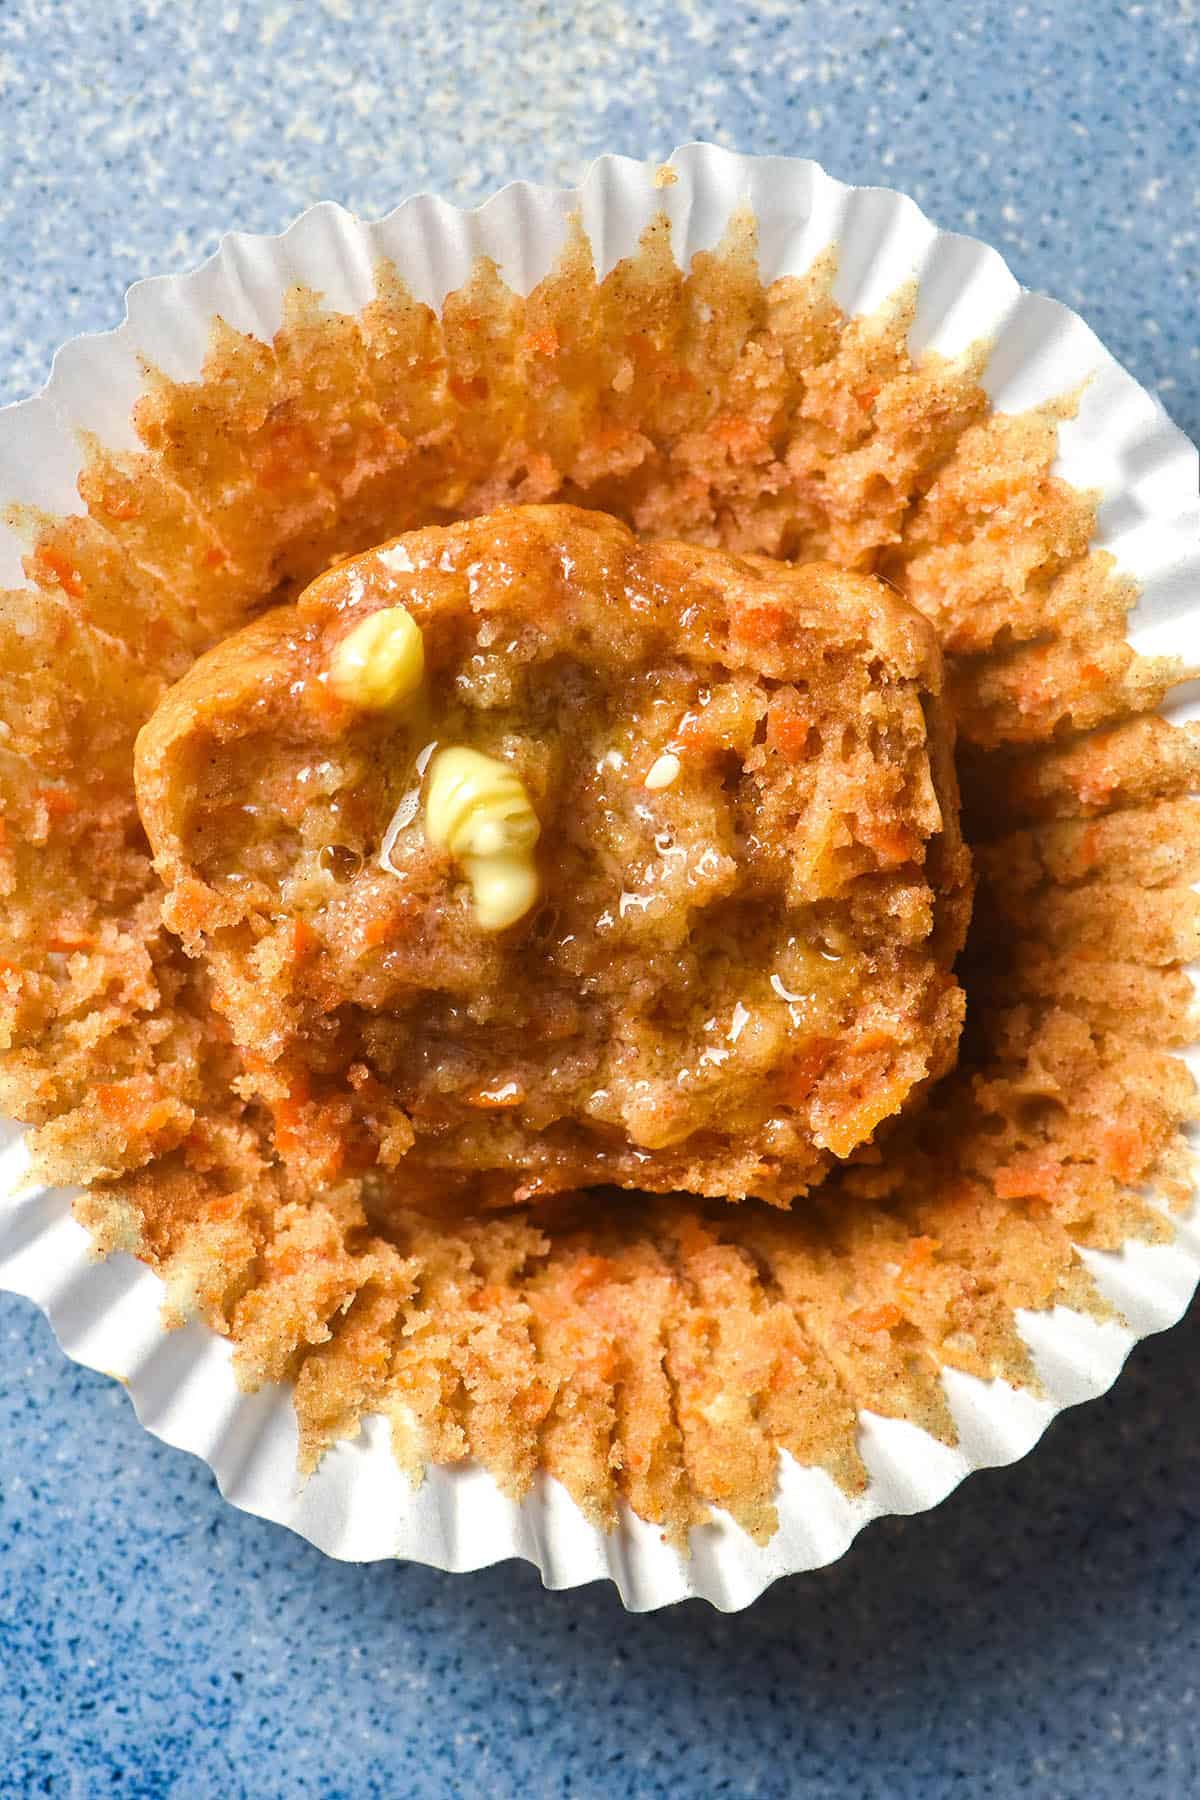 An aerial image of half a gluten free banana carrot muffin on a bright blue ceramic plate. The muffin half sits facing upwards on the muffin liner. It has been topped with melty butter